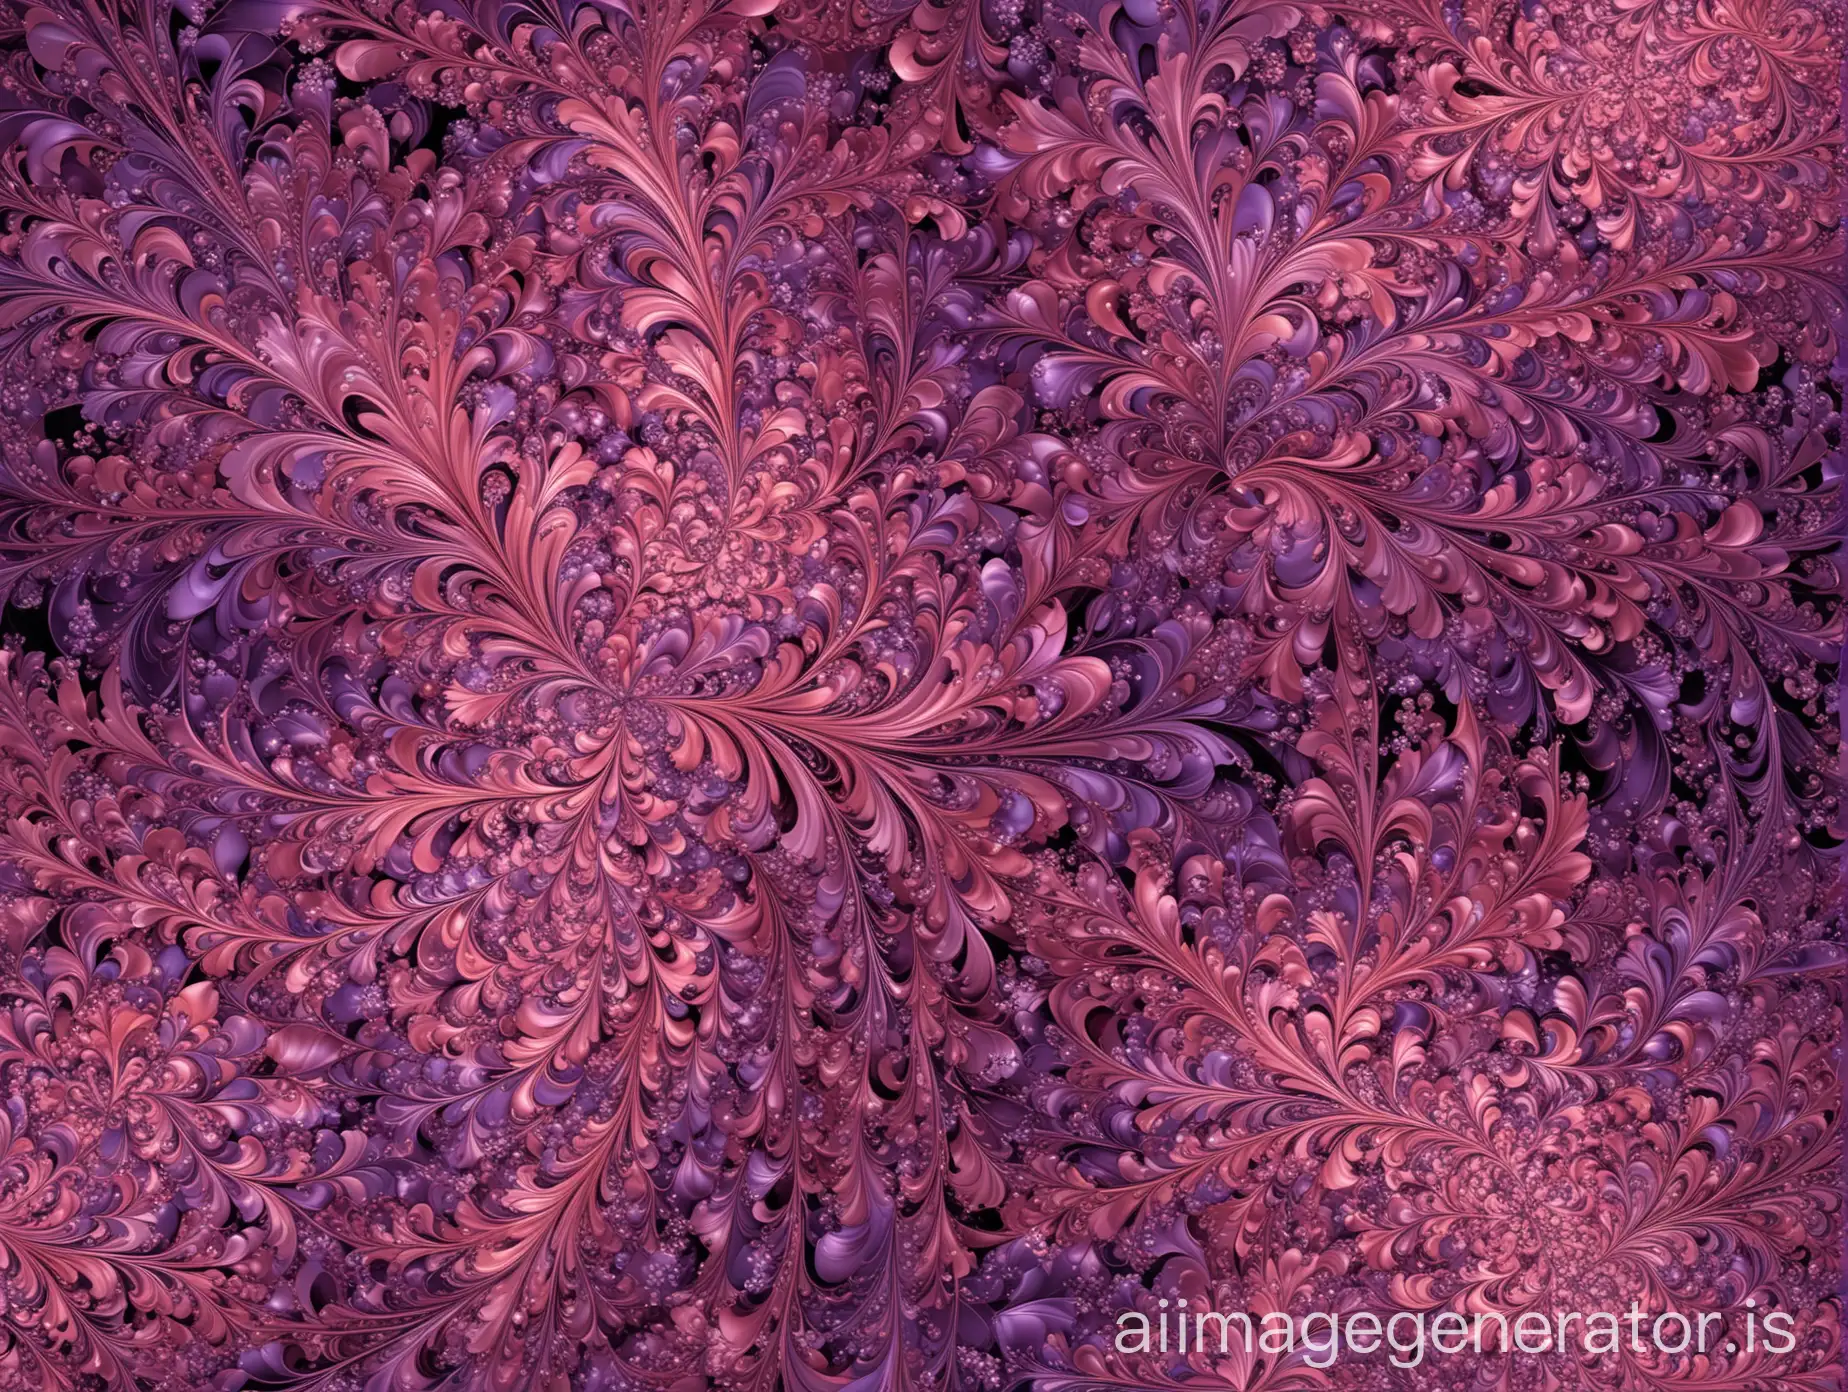 Mesmerizing-Fractal-Design-Repeating-Patterns-in-Pink-and-Purple-Hues